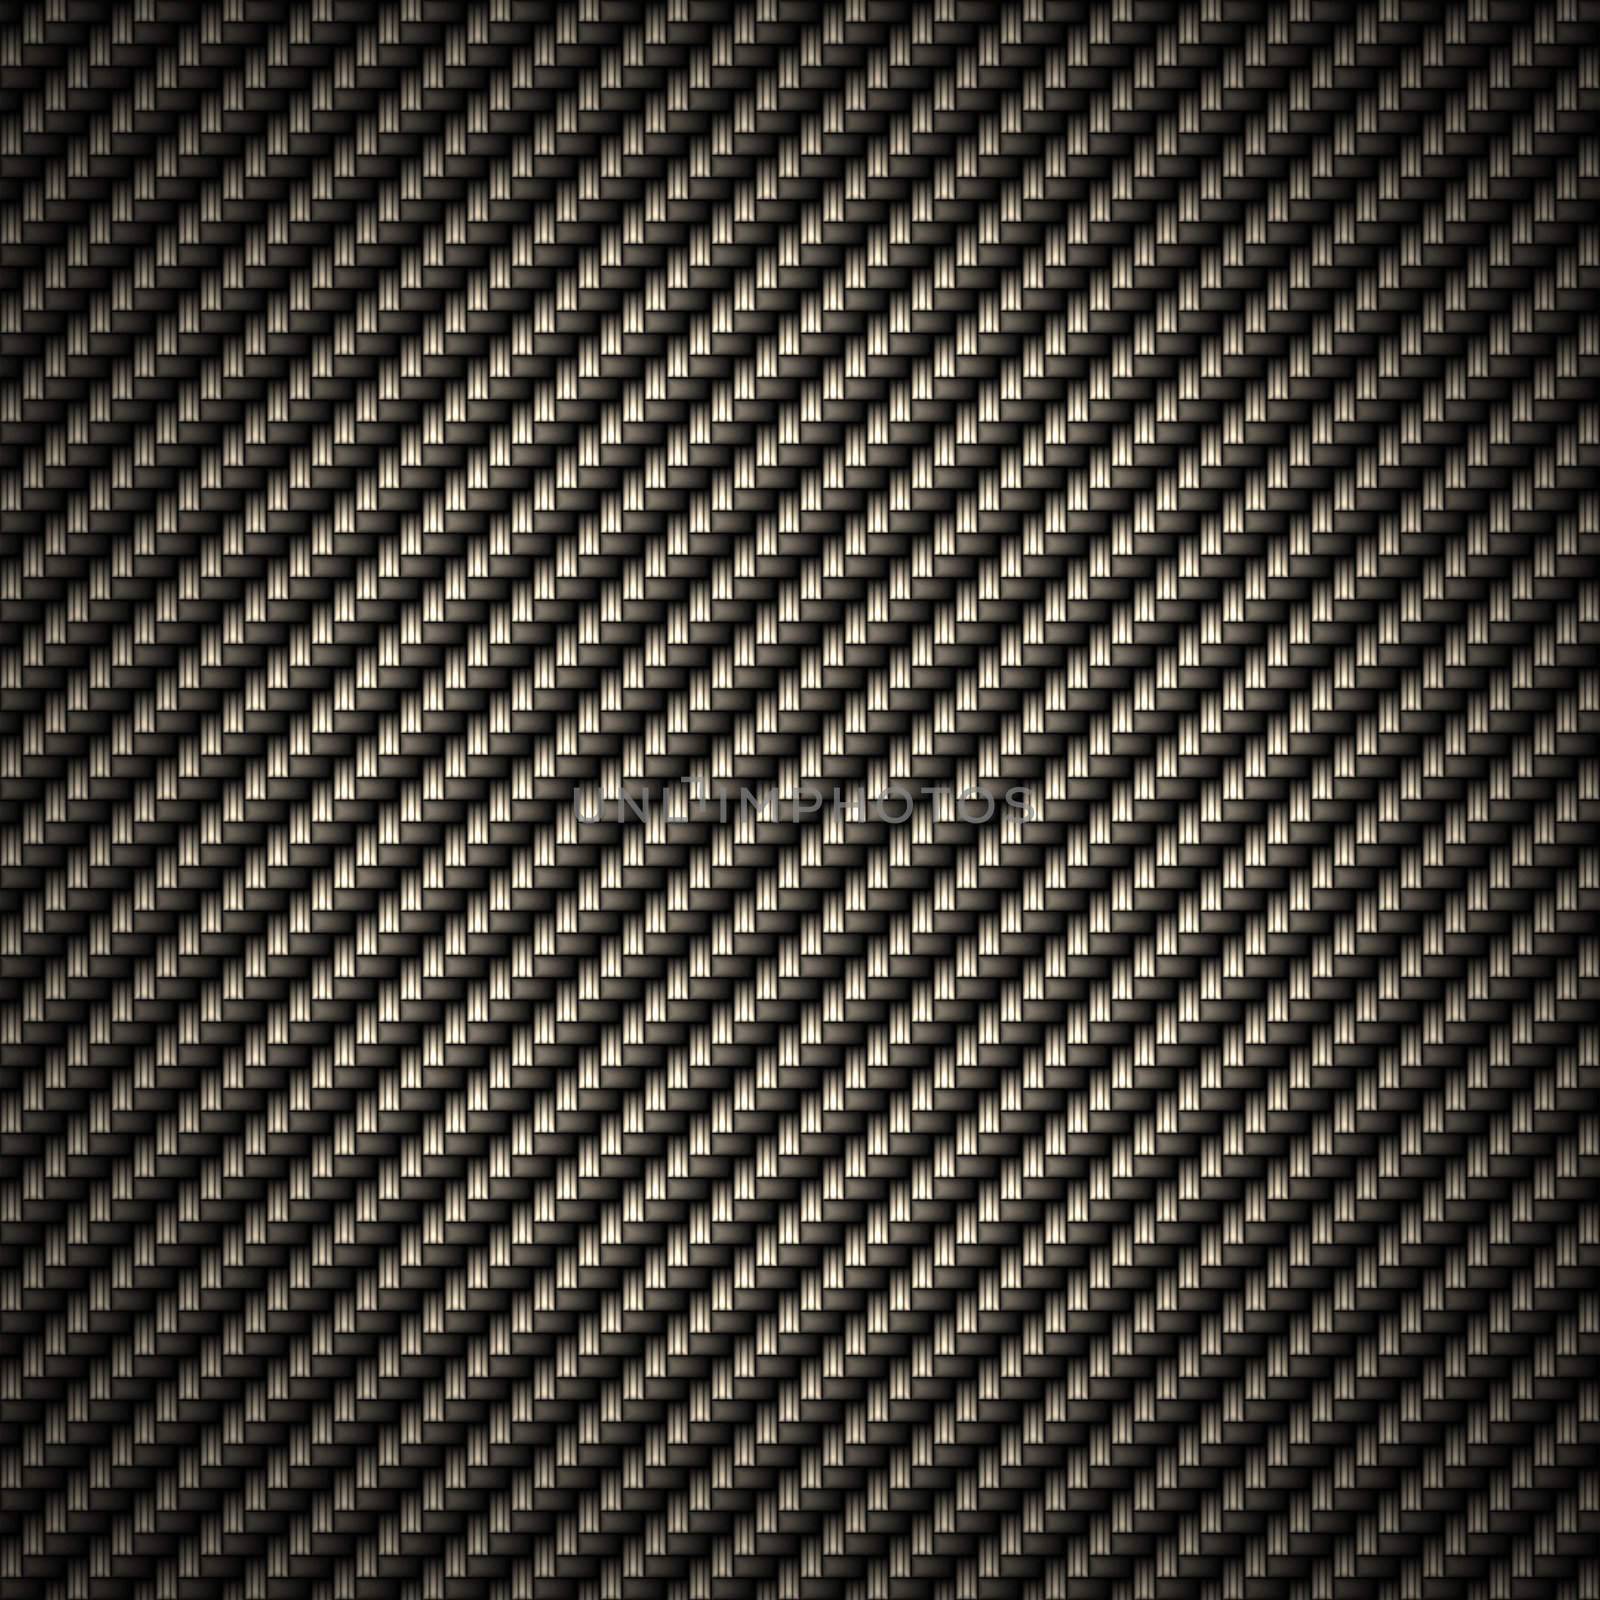 A realistic carbon fiber background that tiles seamlessly as a pattern in any direction.